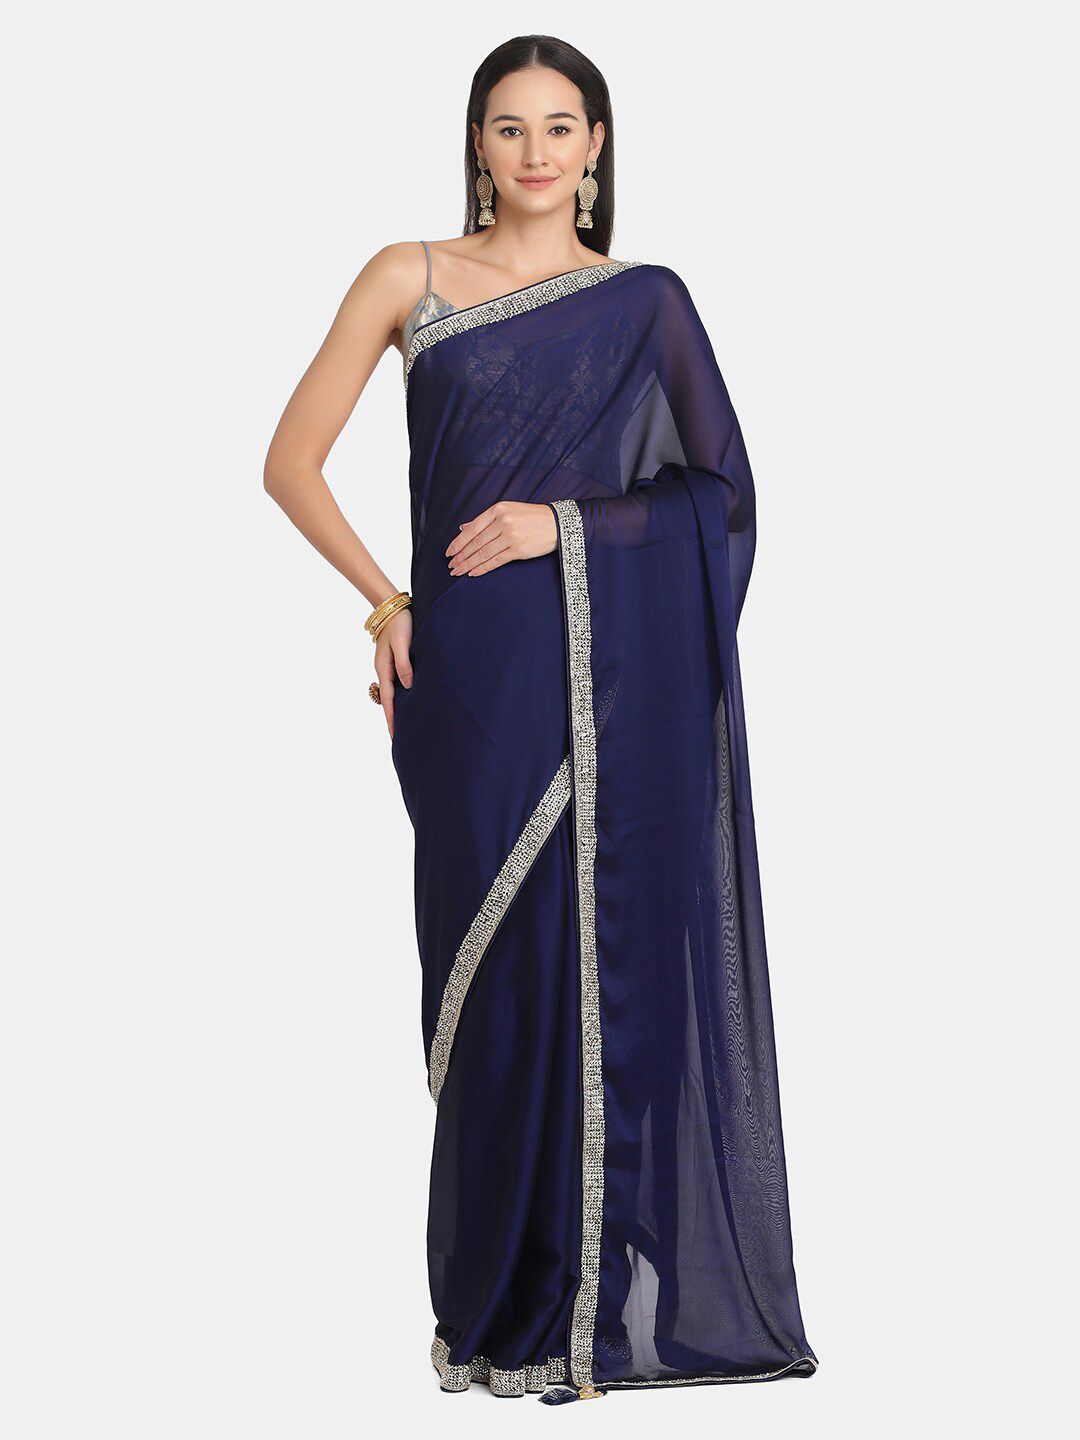 BOMBAY SELECTIONS Blue & Silver-Toned Embroidered Pure Crepe Saree Price in India